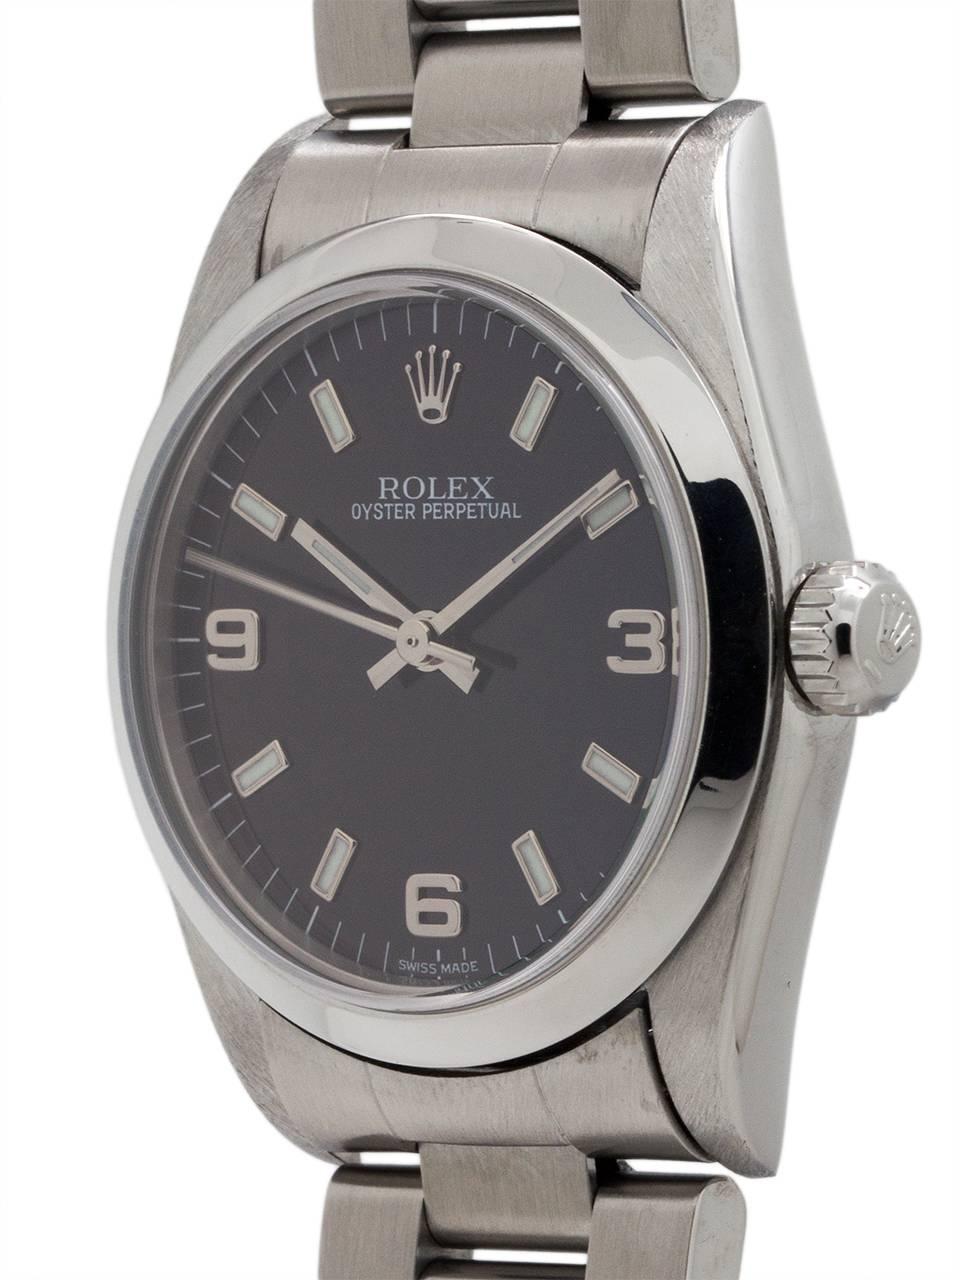 Rolex Oyster Perpetual midsize model ref 77080 stainless steel A2 serial # circa 1998. Featuring 31mm diameter case with smooth bezel and sapphire crystal and original black dial with popular 3/6/9 Explorer style configuration. Powered by self